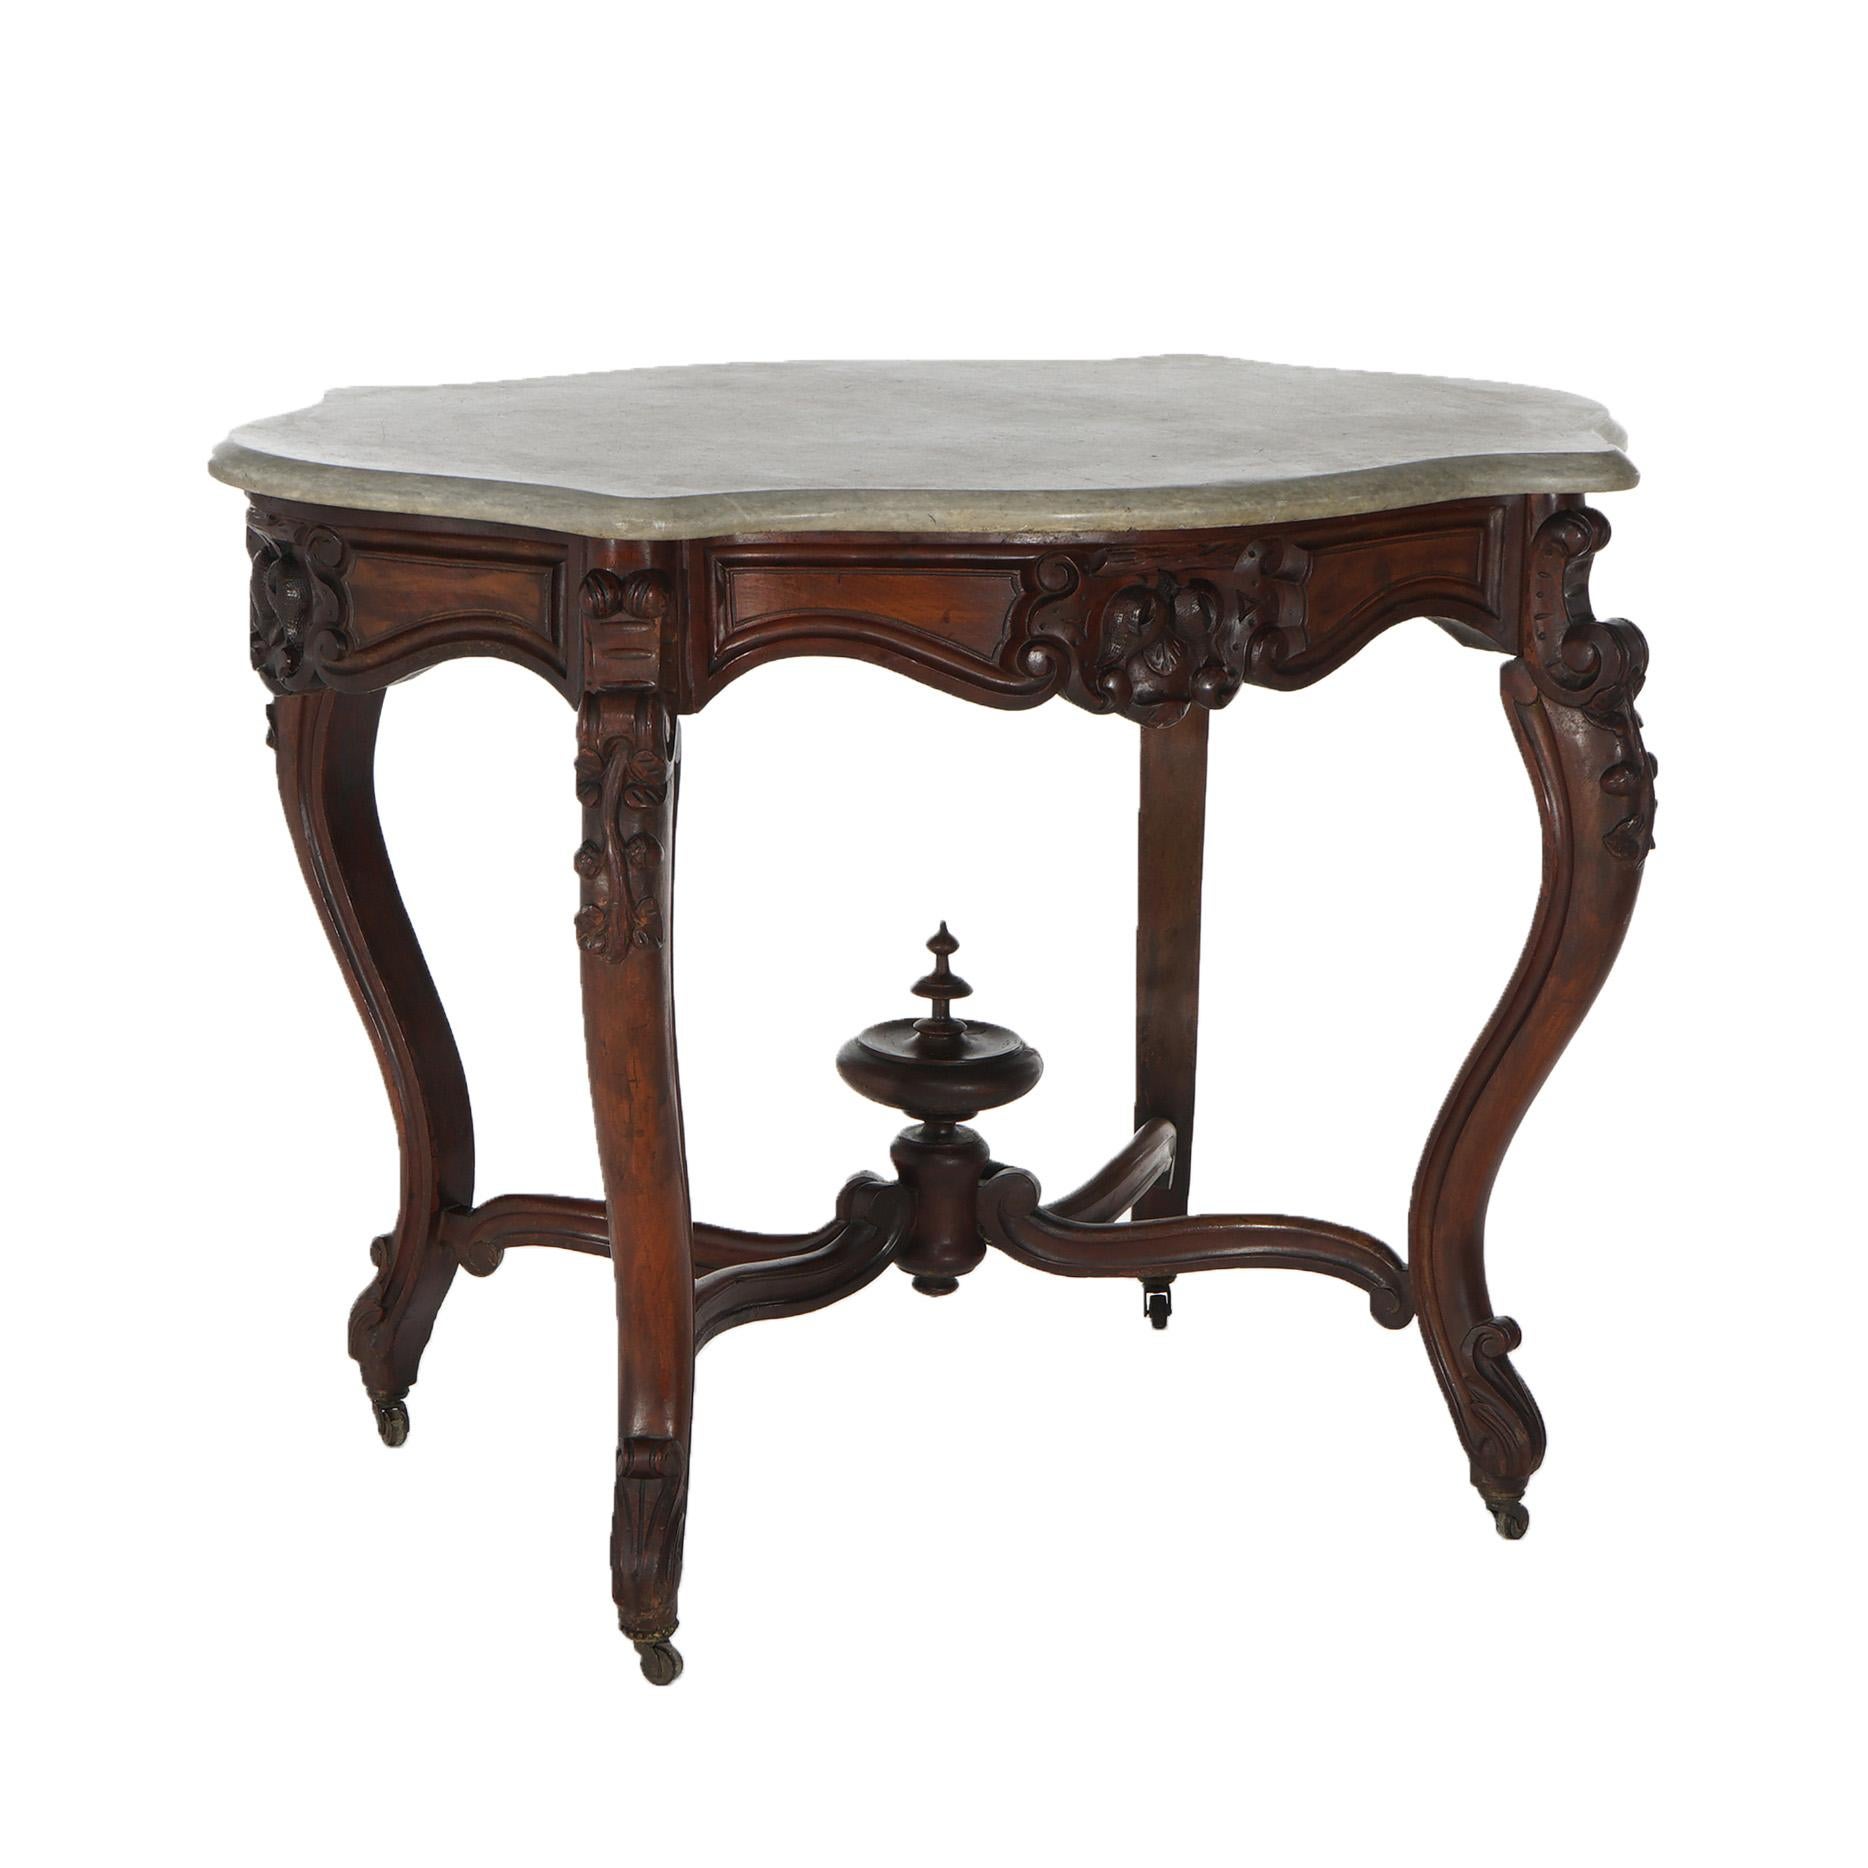 Renaissance Revival Antique Victorian Rococo Carved Walnut & Marble Top Parlor Table C1800 For Sale